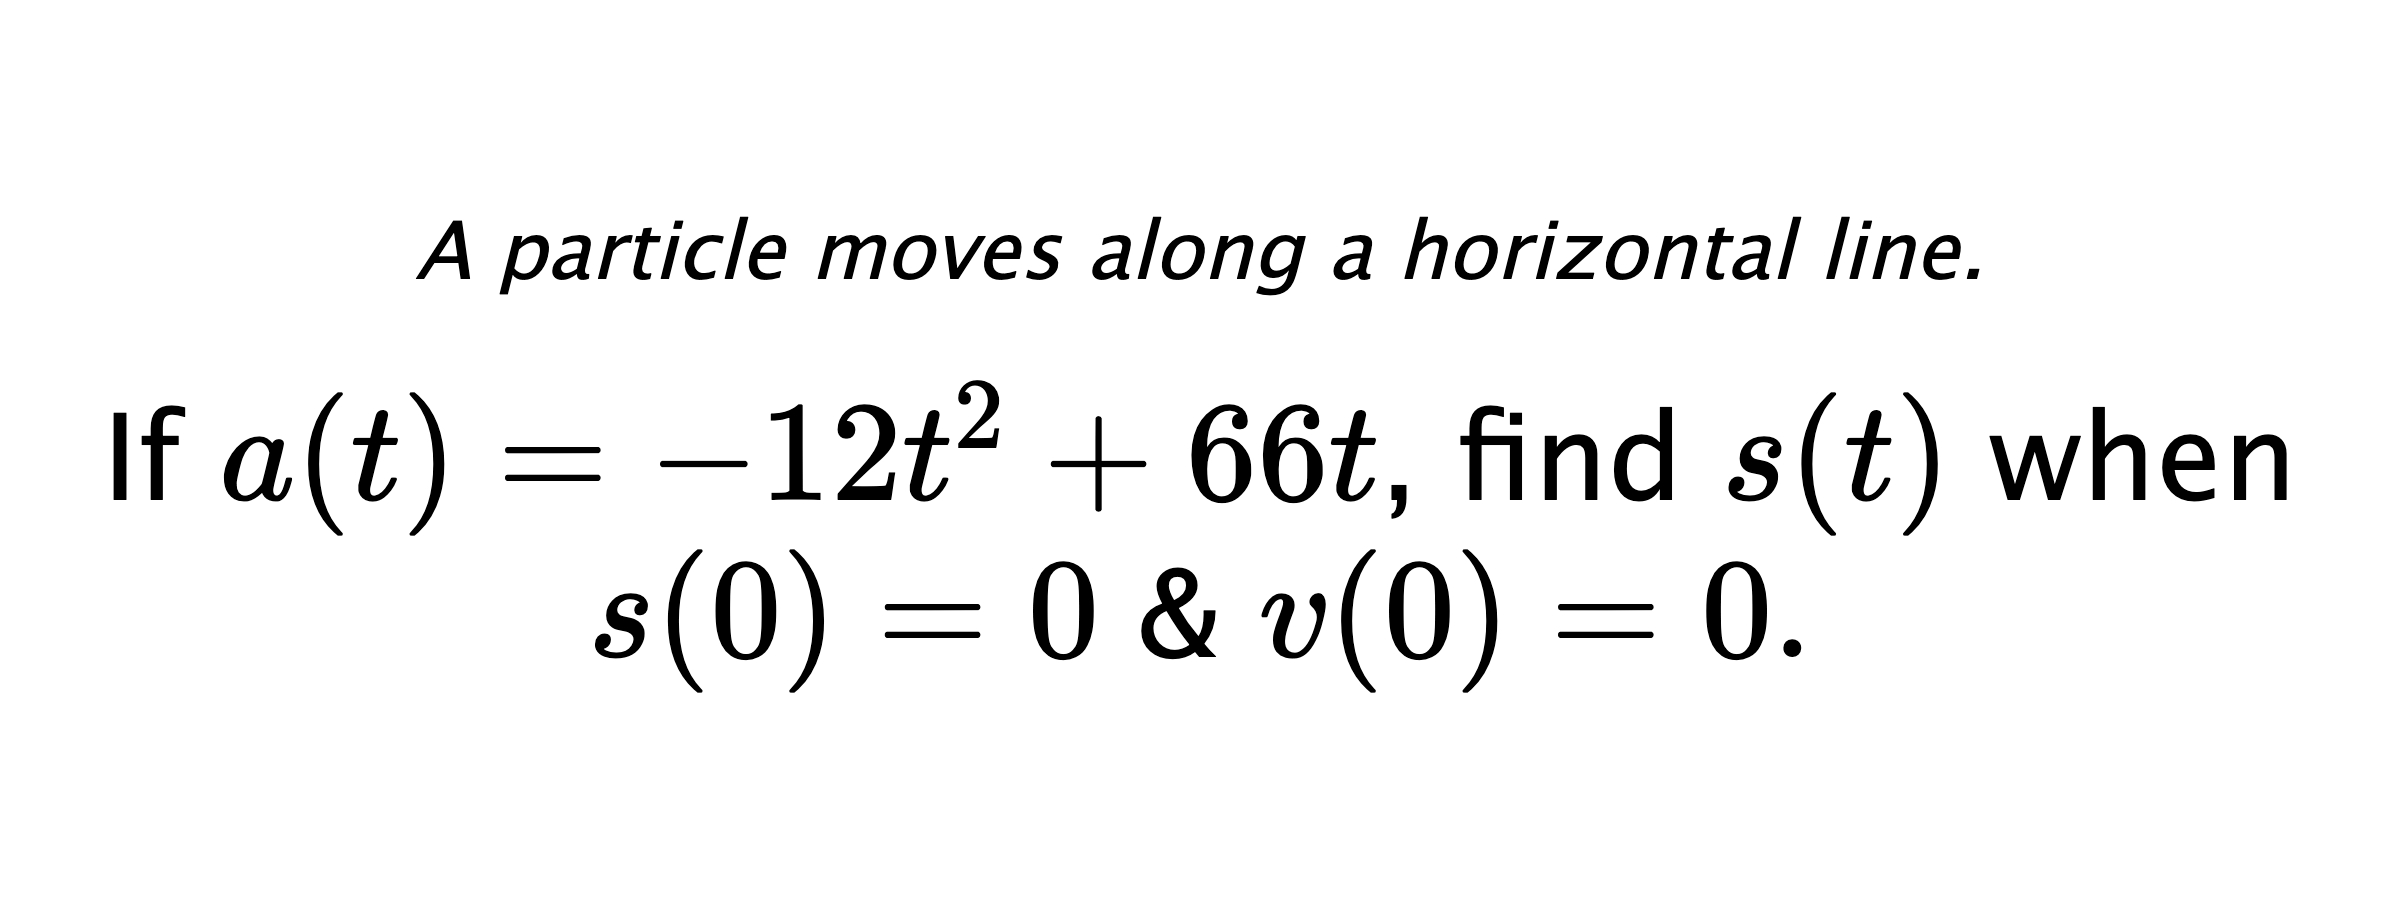 A particle moves along a horizontal line. If $ a(t)=-12t^2+66t $, find $ s(t) $ when $ s(0)=0 $ & $ v(0)=0 .$